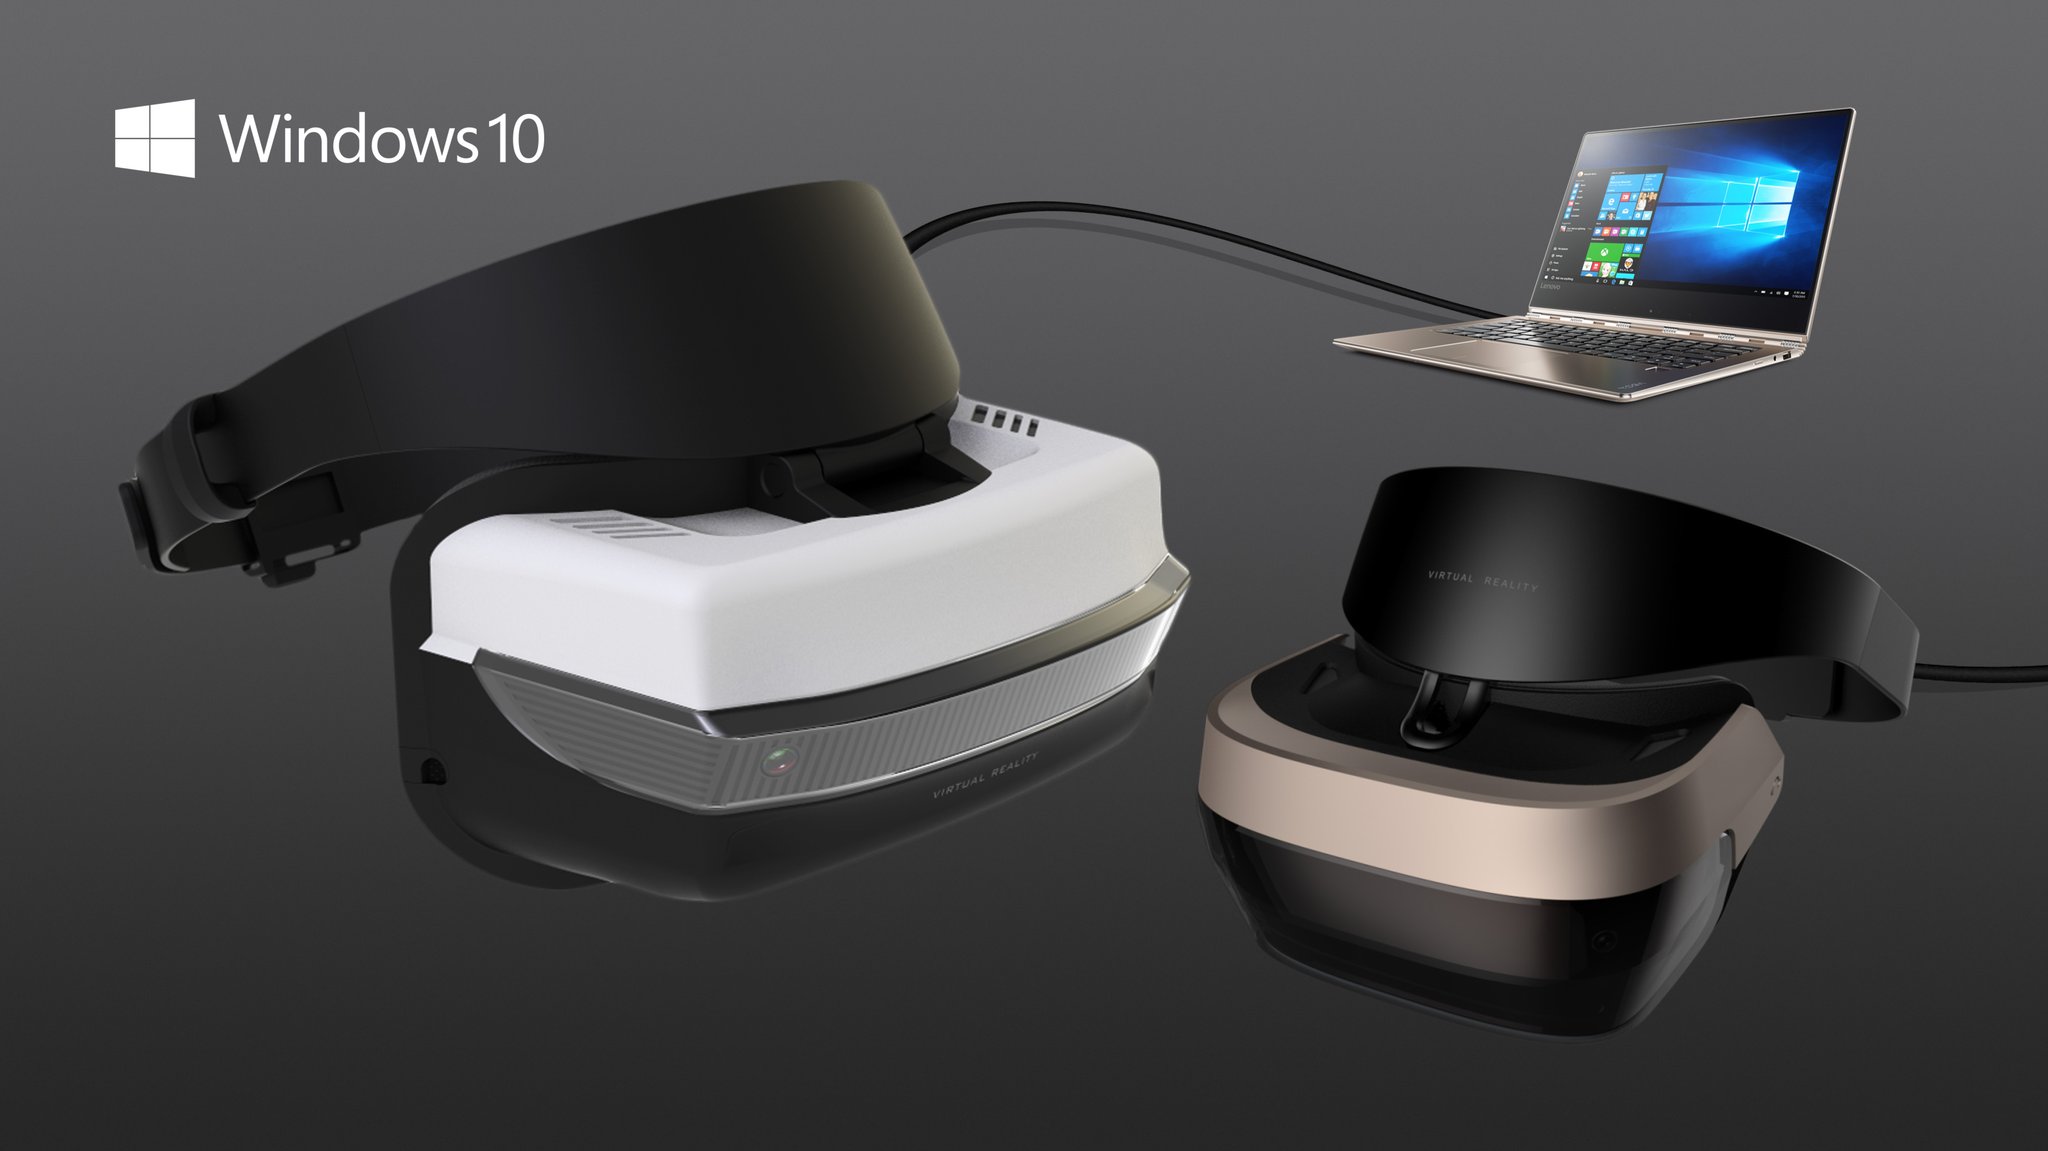 Microsoft Windows 10 VR: will your PC support it?